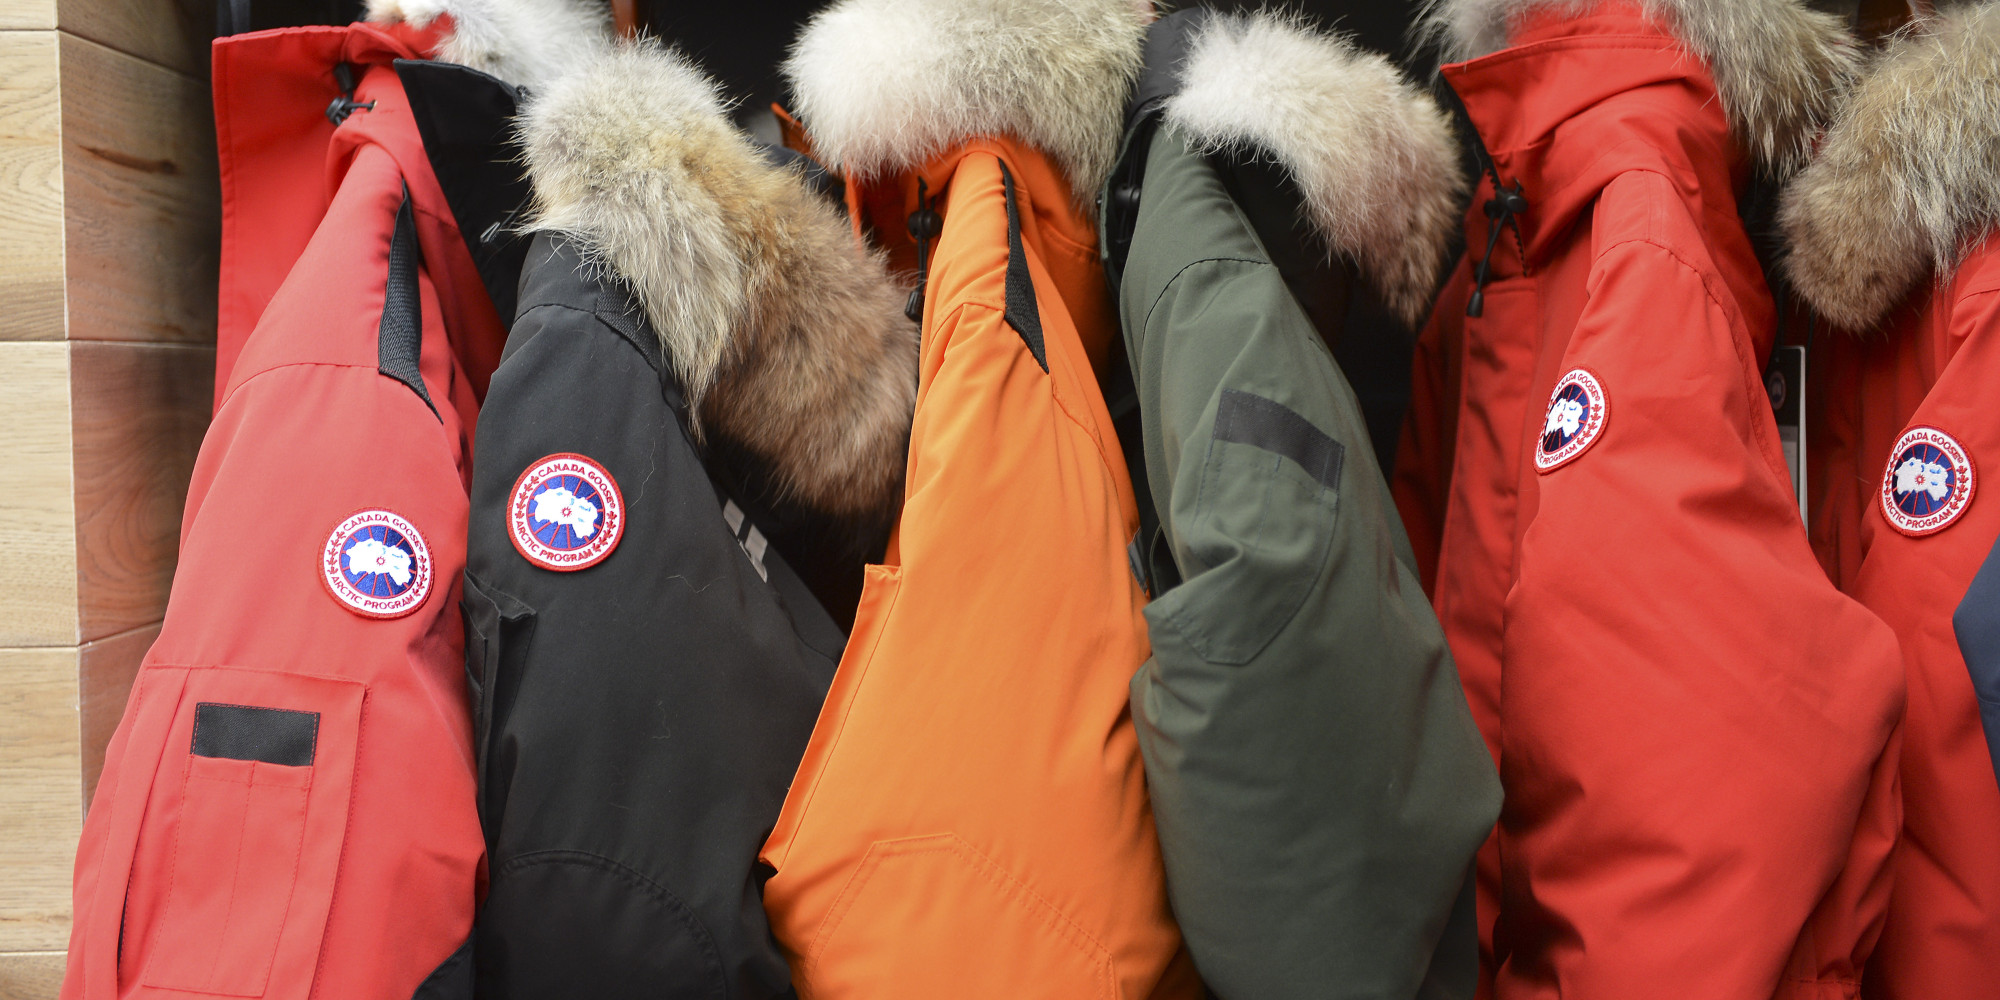 Canada Goose expedition parka online discounts - Canada Goose Jackets Keep Getting Stolen At Boston University